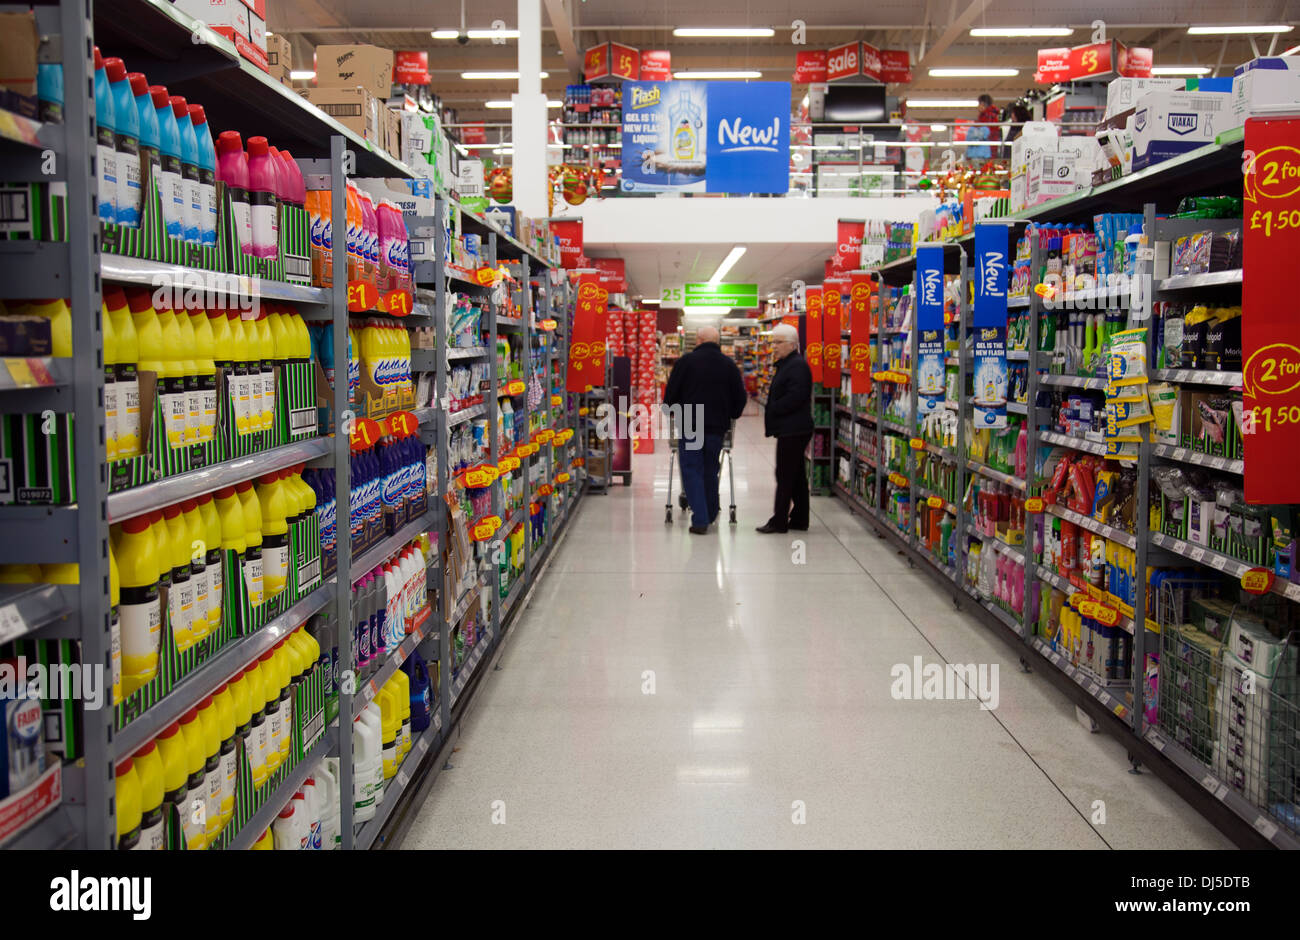 Asda Aisle of Cleaning Detergents in Wandsworth - London UK Stock Photo